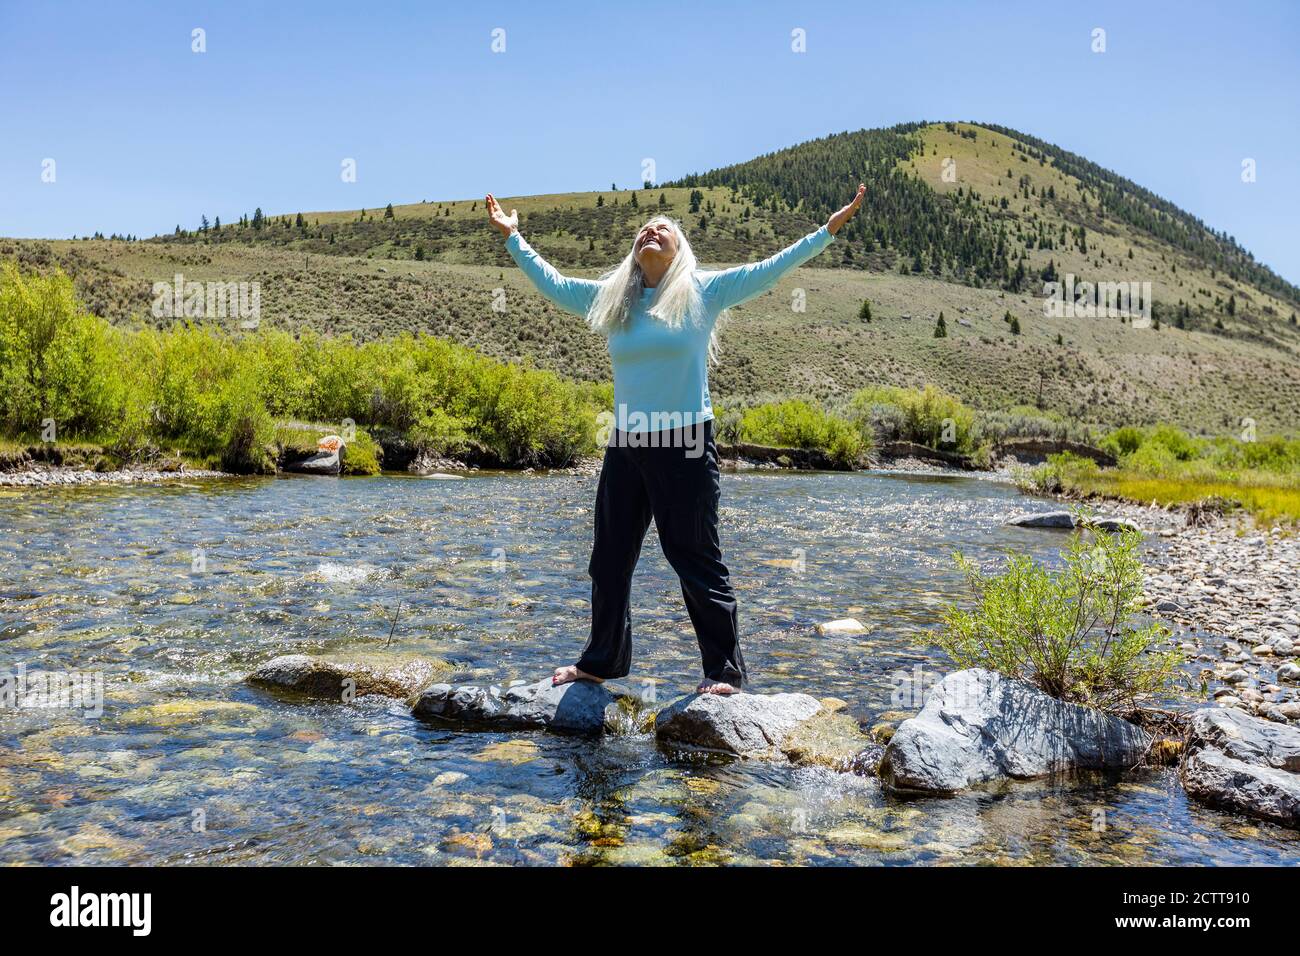 USA, Idaho, Sun Valley, Woman with arms raised standing on rocks in river Stock Photo